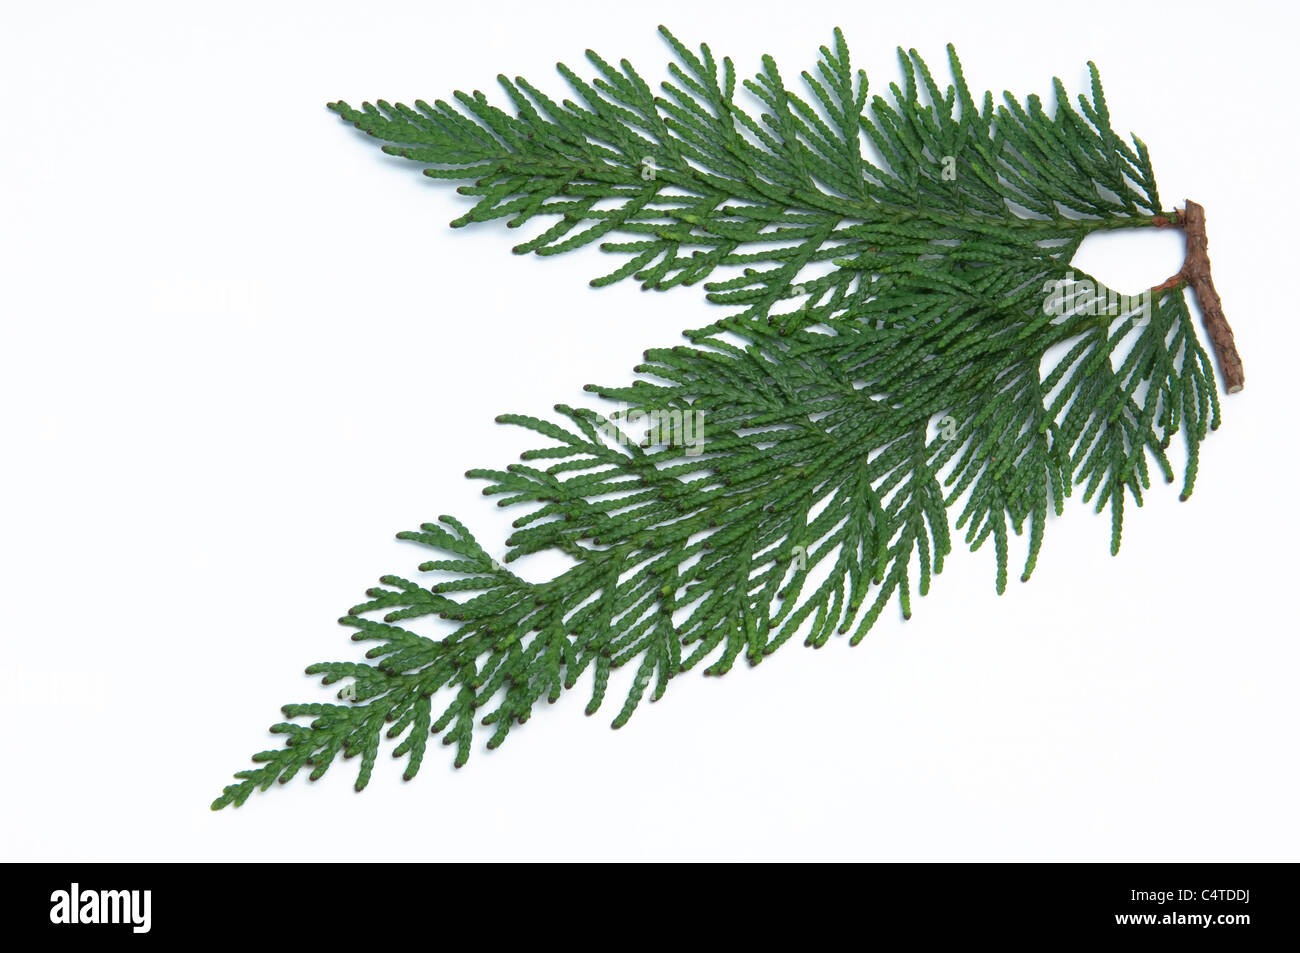 Western Red Cedar (Thuja plicata Excelsa), twig. Studio picture against a white background. Stock Photo